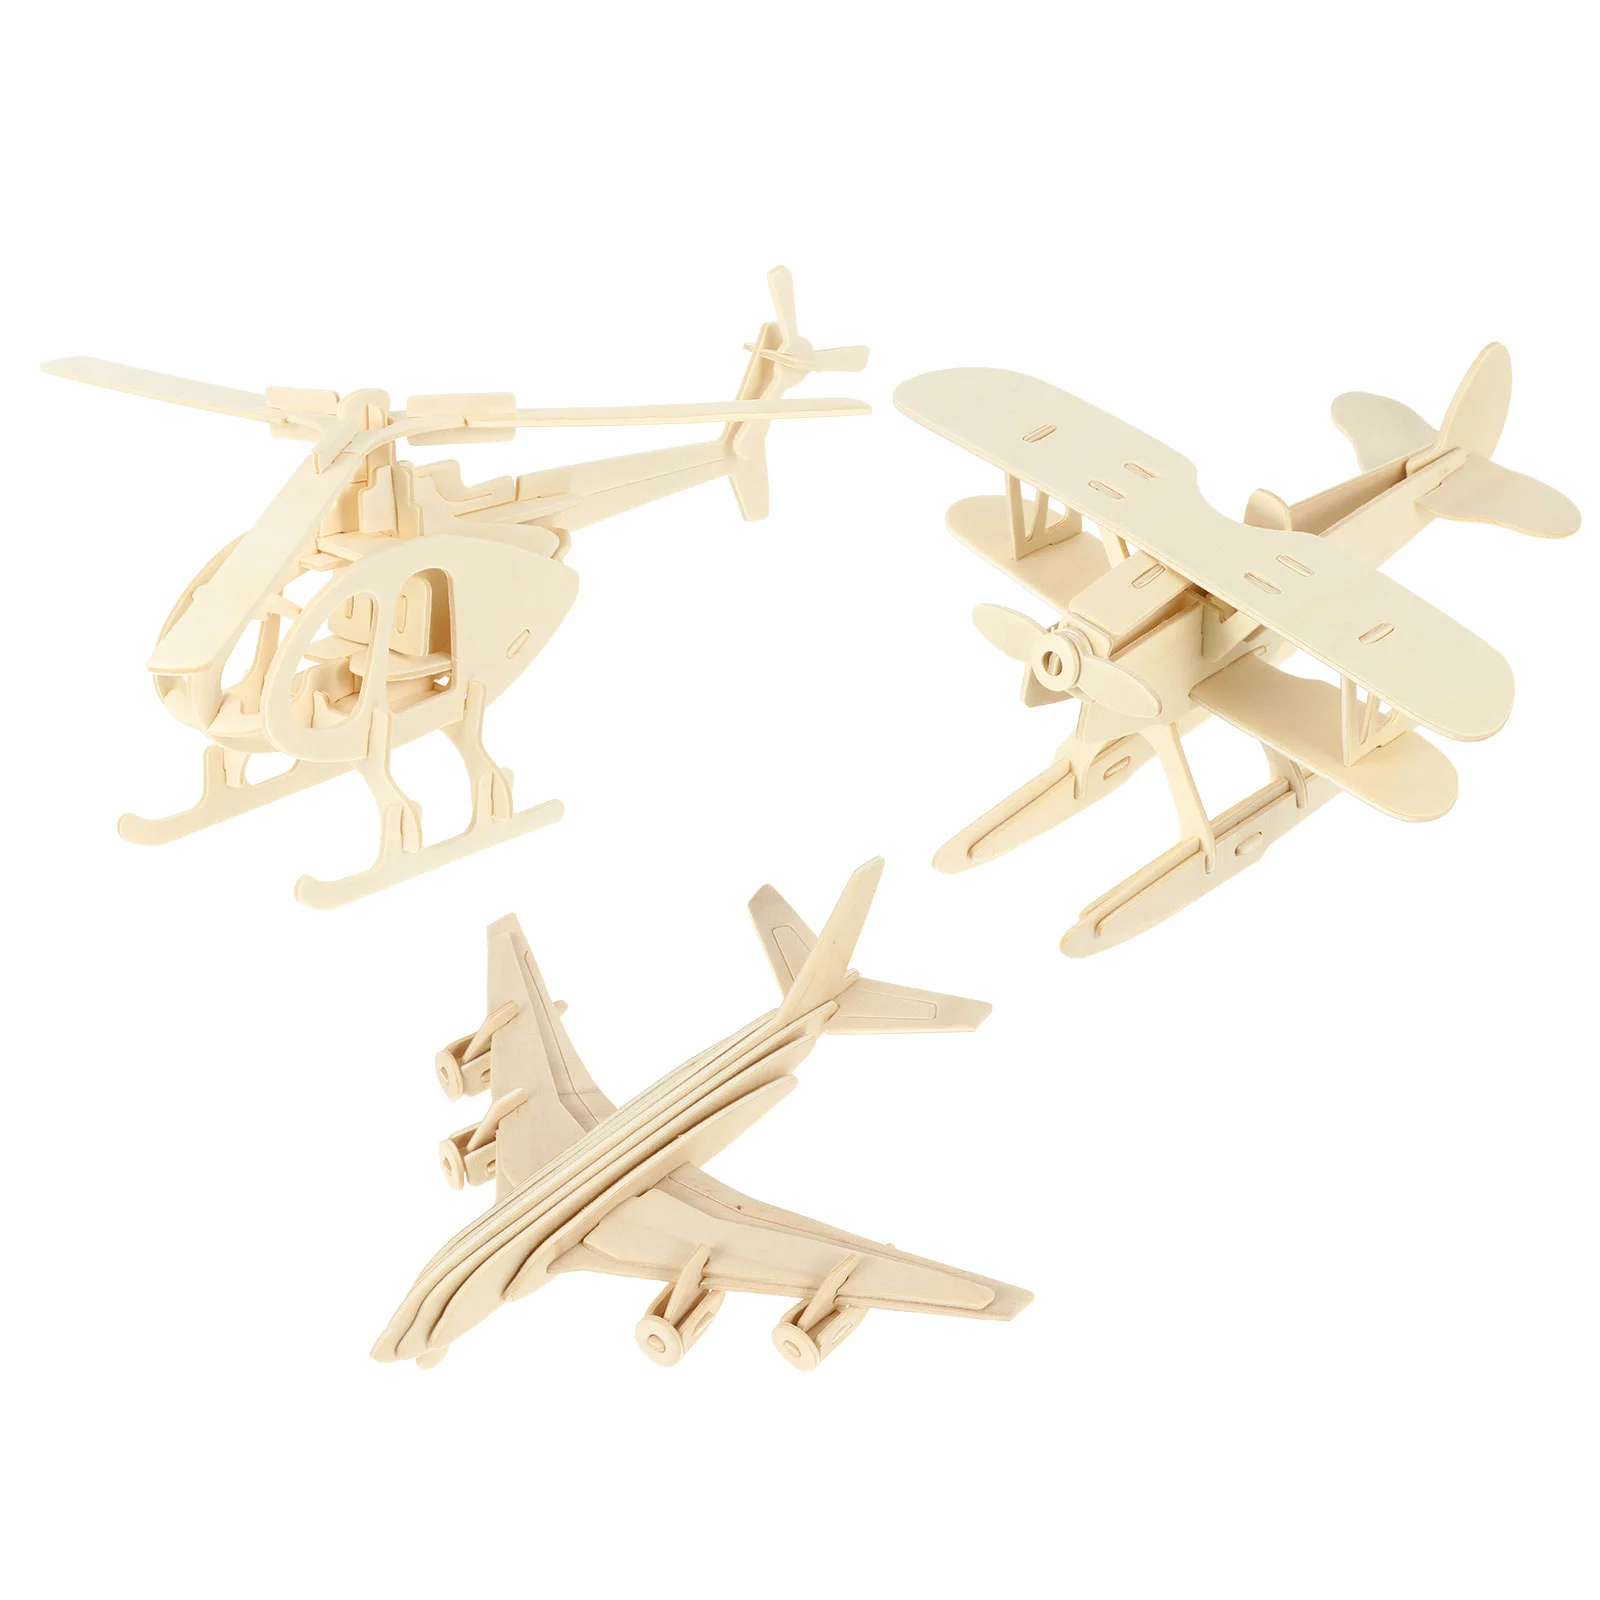 

Airplane Model Toys Aircraft Kit Wood Brain Teaser Puzzles for Kids Wooden Blocks